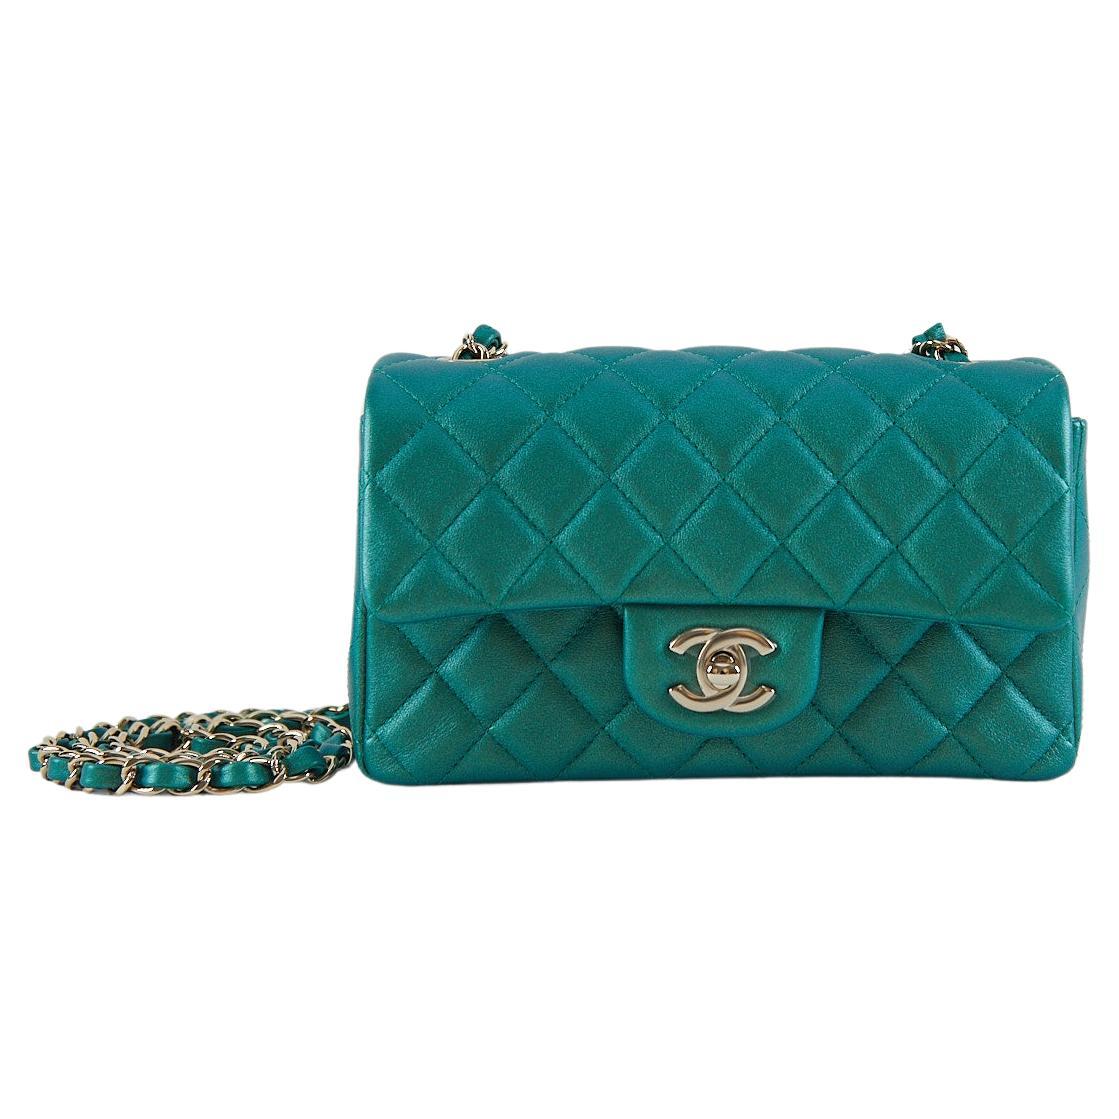 CHANEL MINI FLAP BAG PEARLESCENT GREEN Lambskin Leather with Champagne Hardware